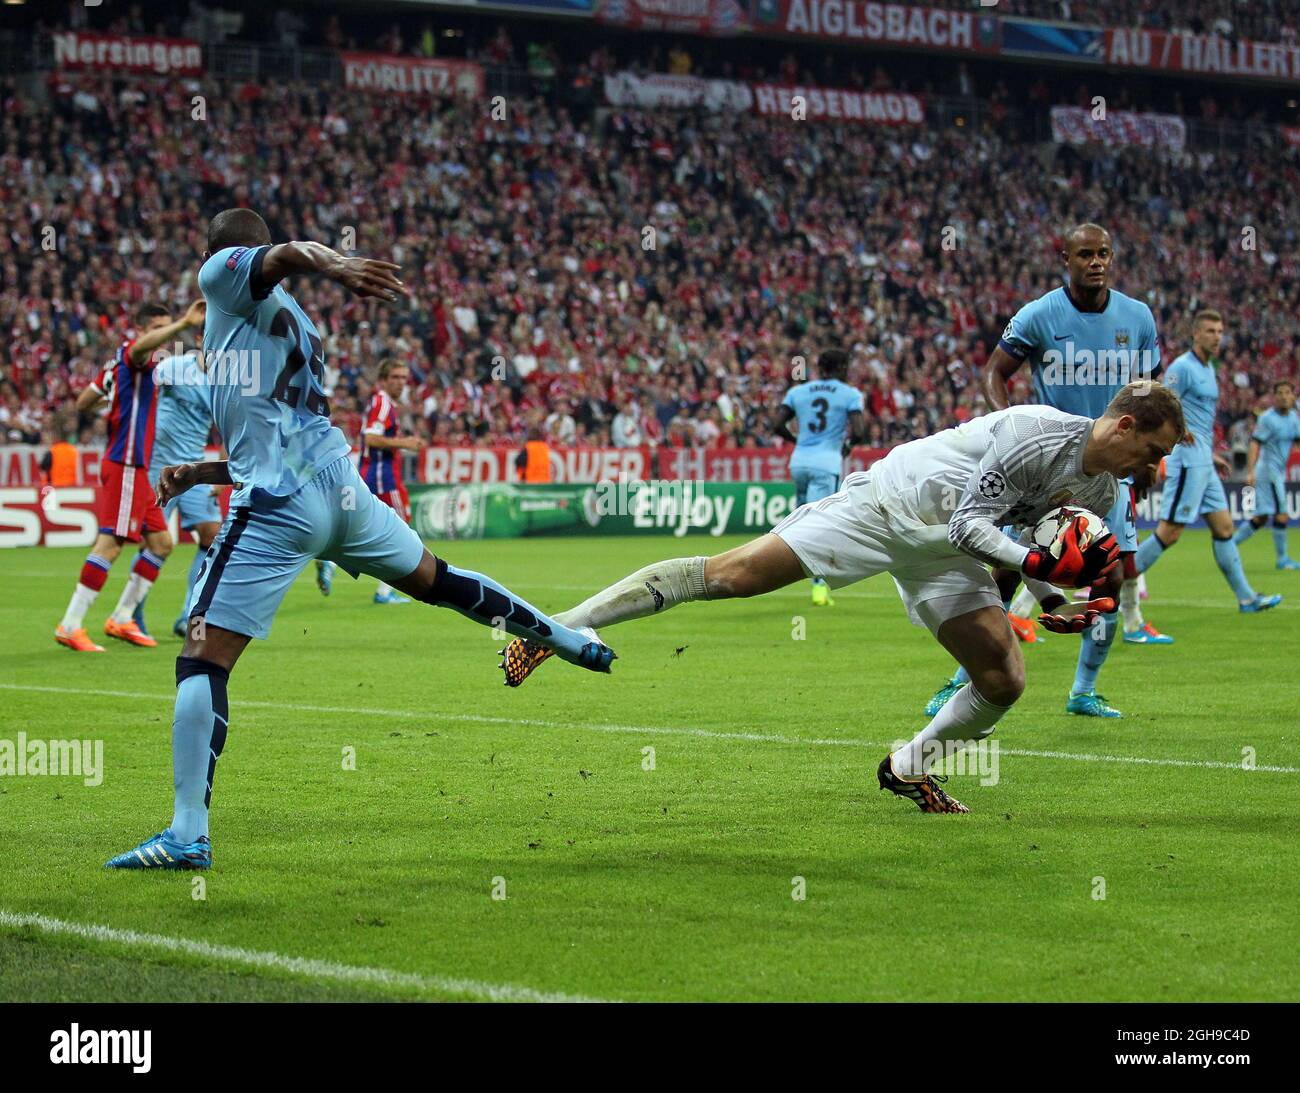 Bayern Munich's Manuel Neuer gets caught late by Manchester City's Fernandinho during the Champions League Group E match between Bayern Munich and Manchester City held at Allianz Arena in Germany on Sept. 17, 2014 . Stock Photo